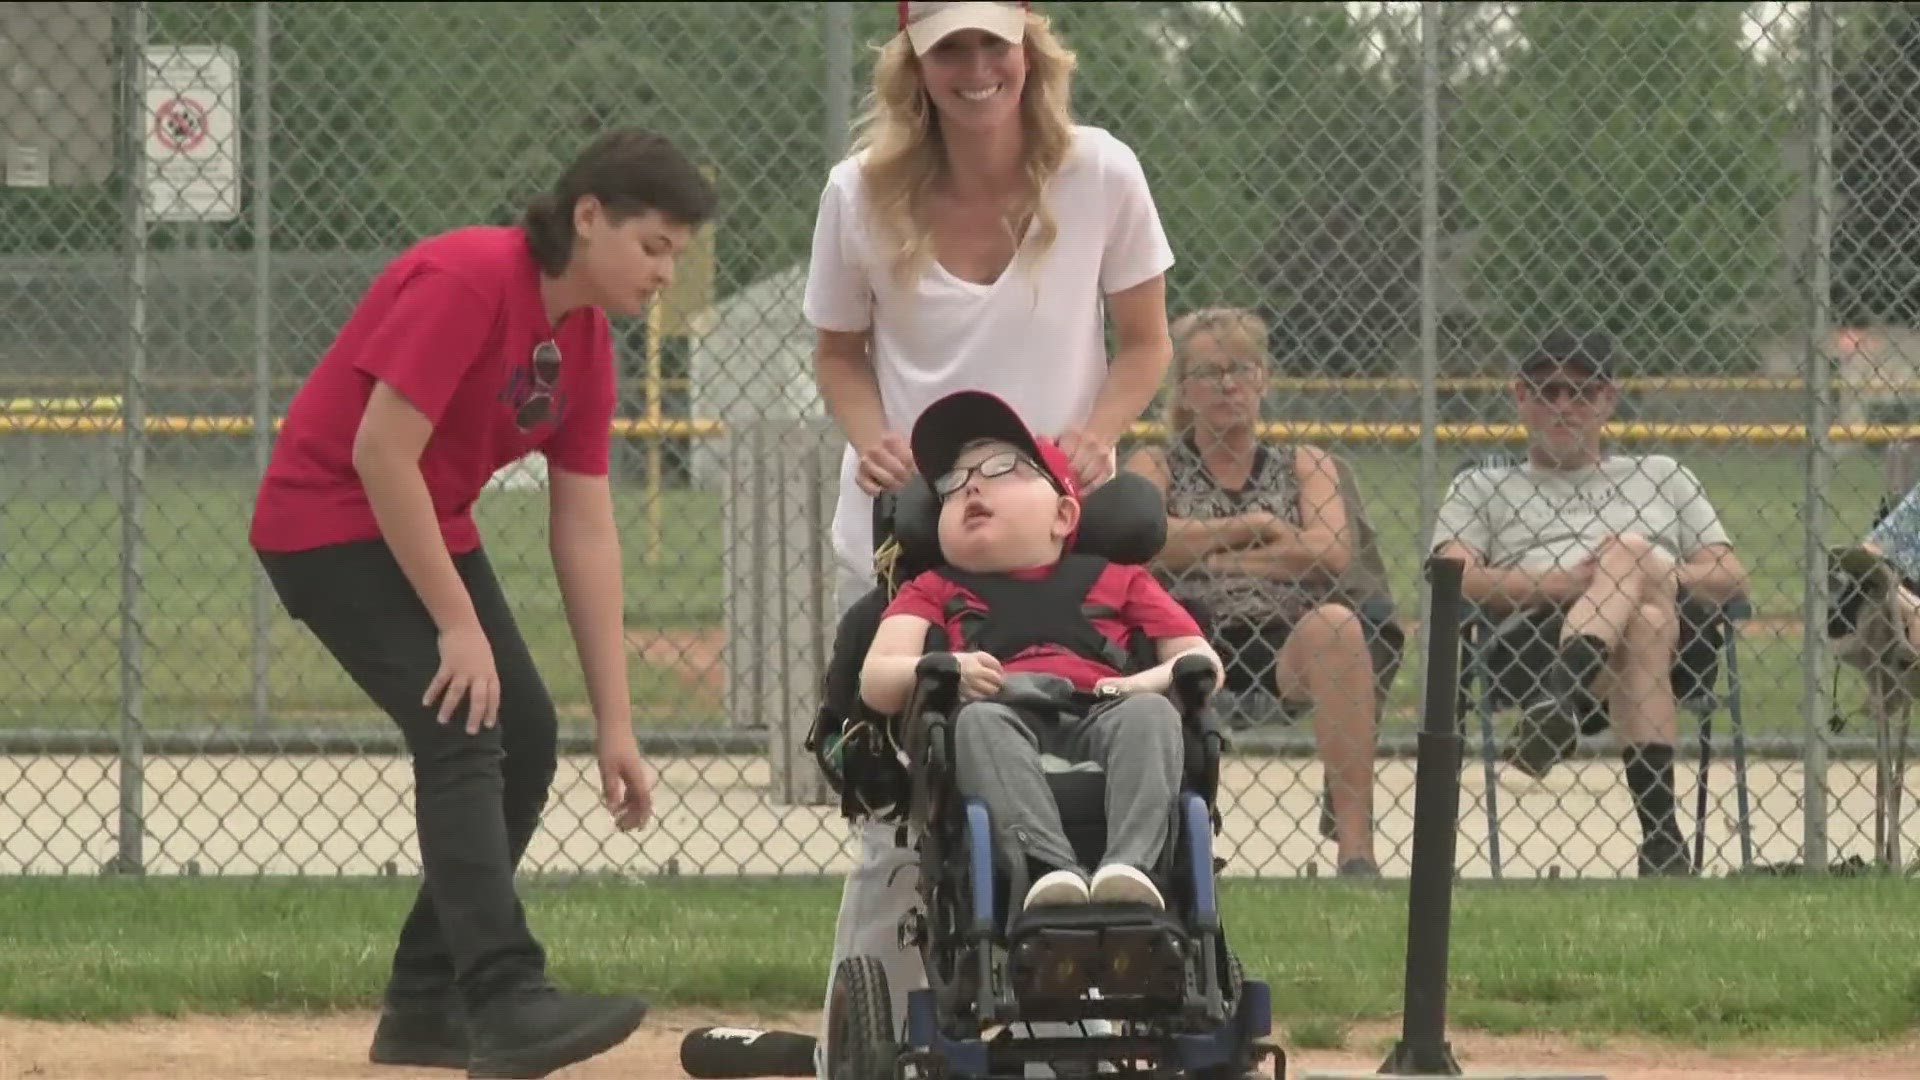 Challenger Little League baseball is open to all people in the Treasure Valley with special needs or disabilities, and no one is turned away.